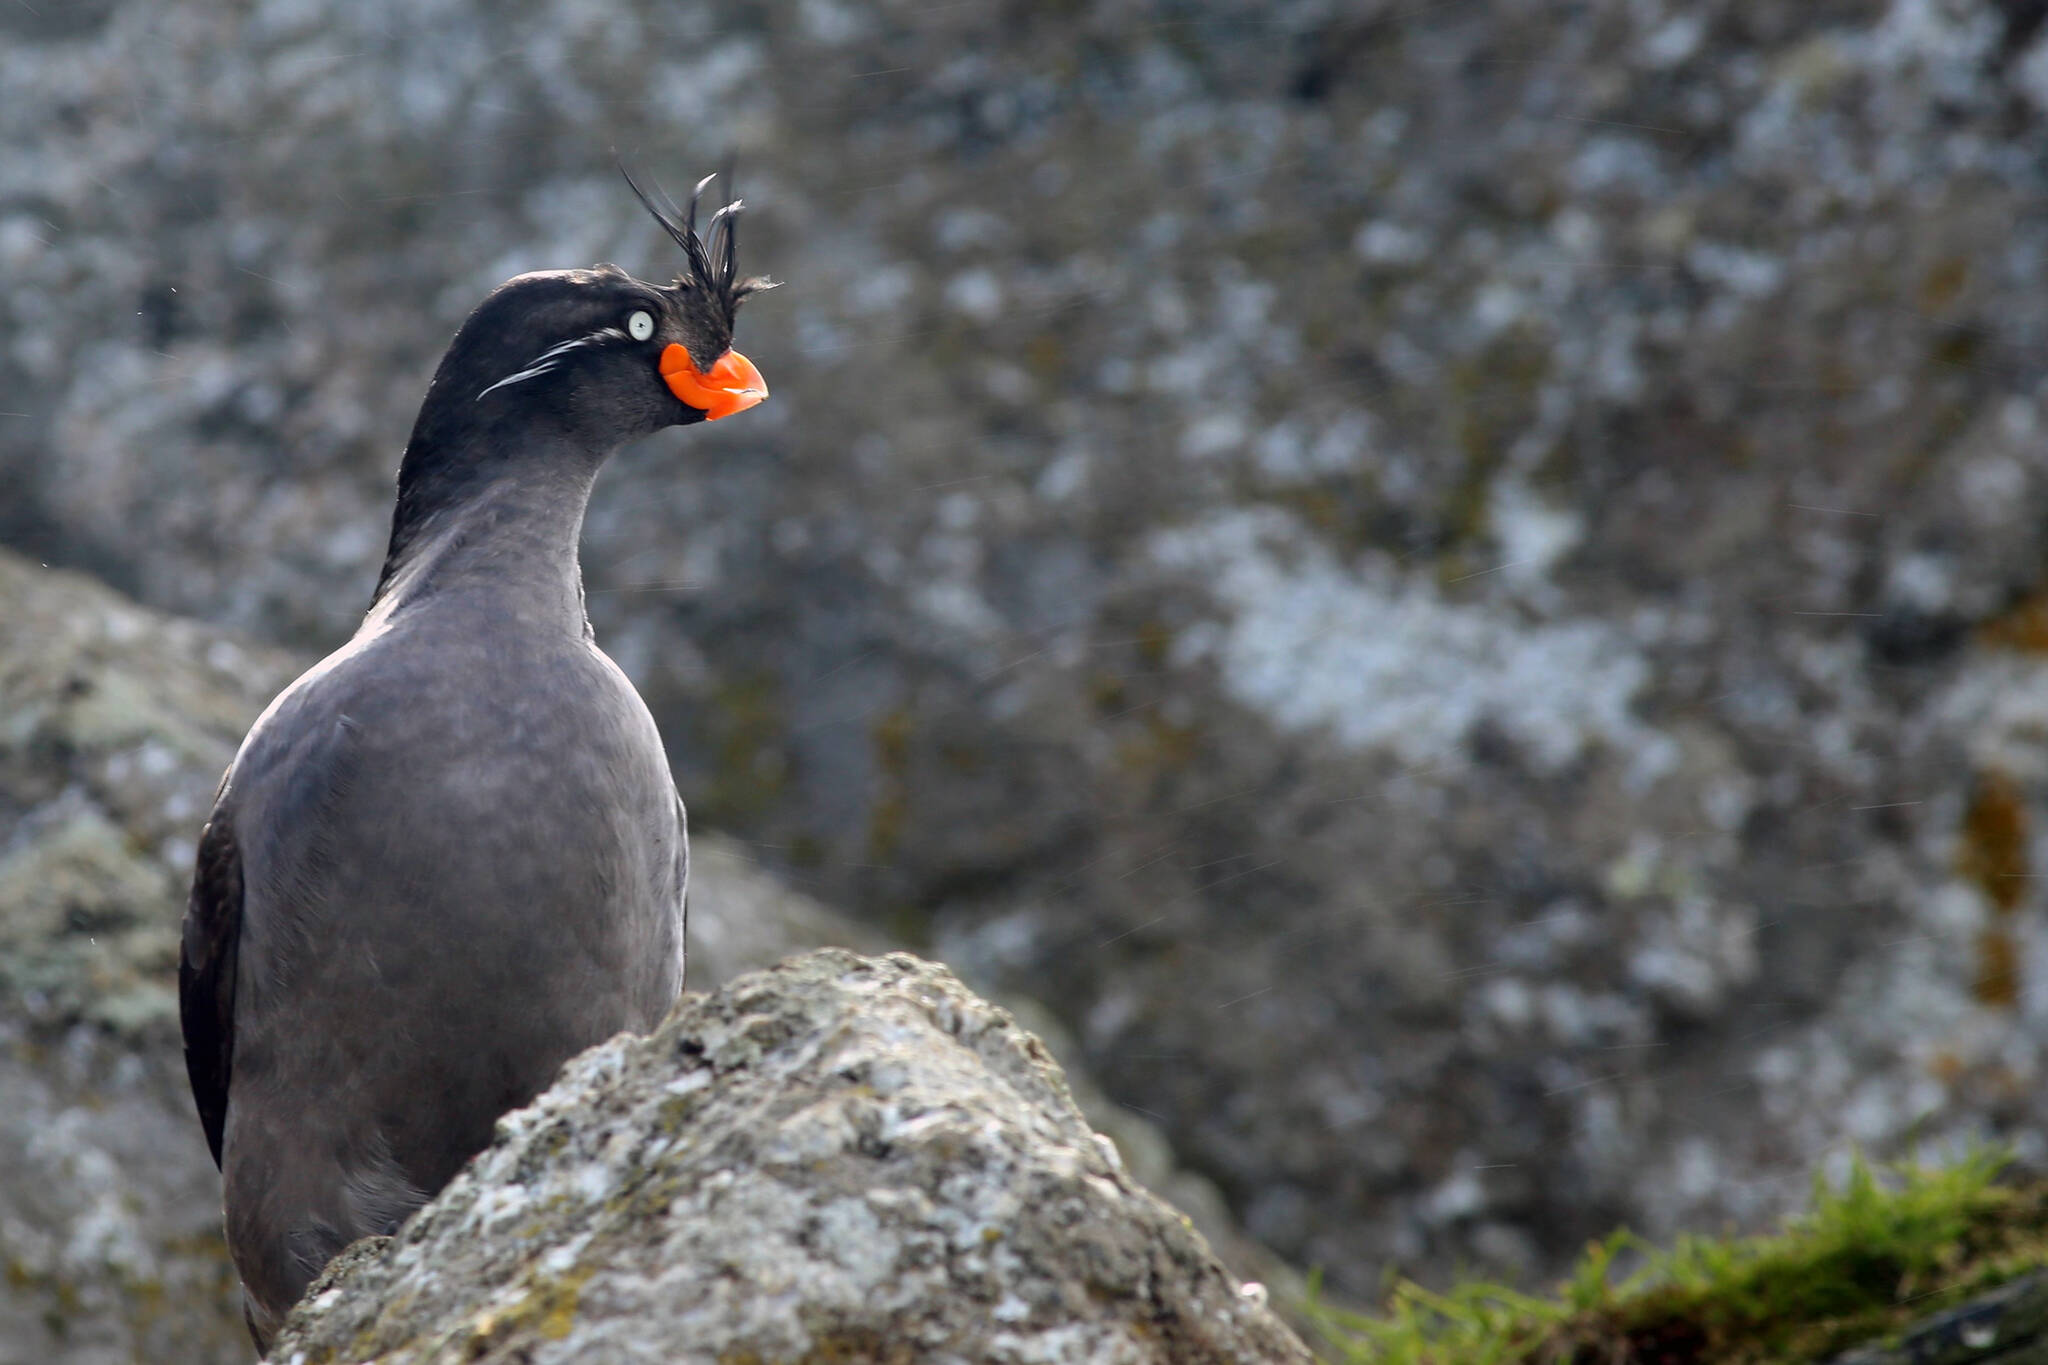 Images: 1. A crested auklet, a seabird that breeds on the islands of western Alaska including the Aleutians.(Courtesy Photo / Hector Douglas)